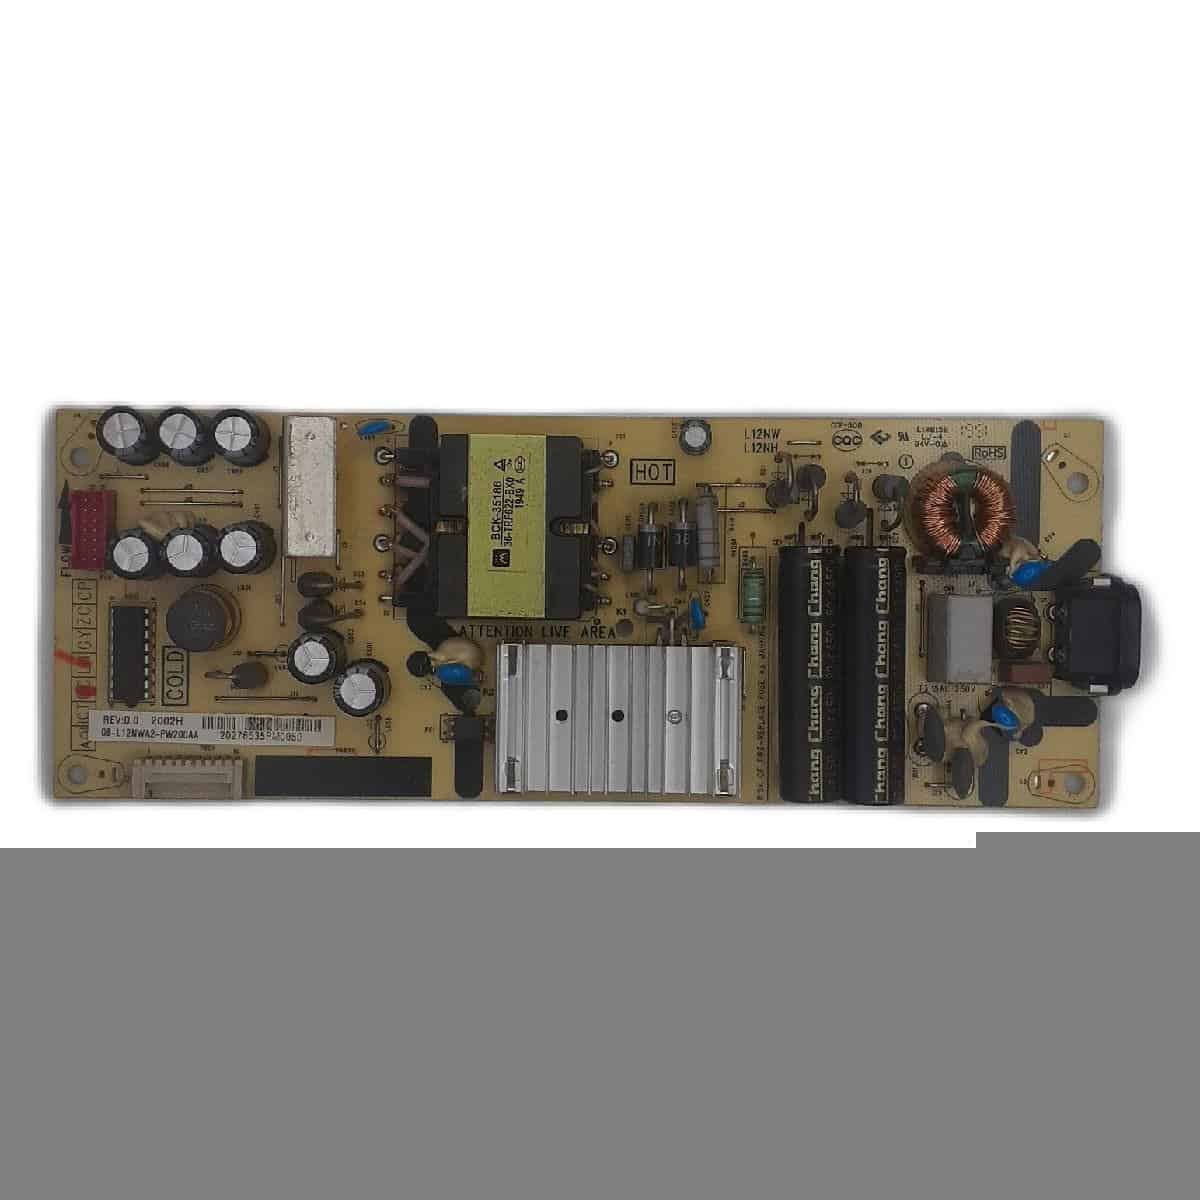 55P8 TCL POWER SUPPLY BOARD FOR LED TV